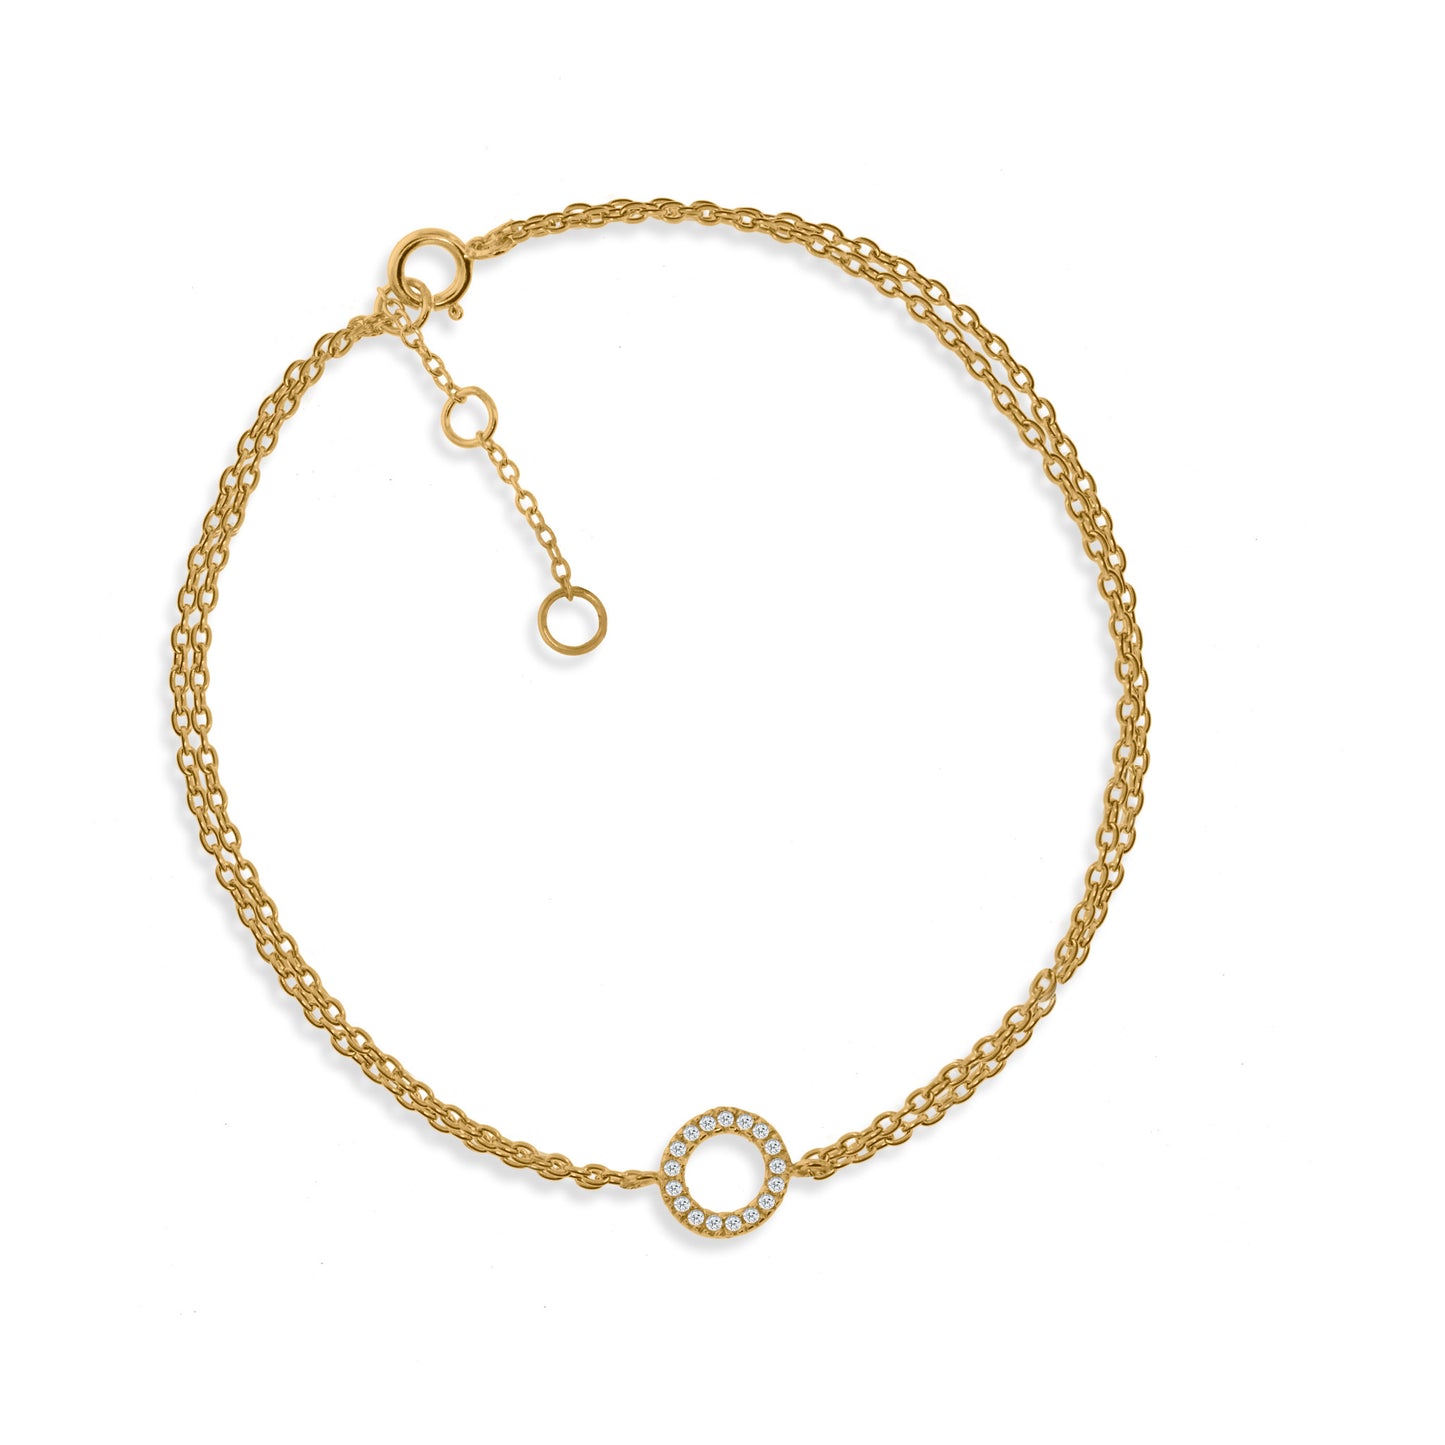 BG-56/G - Double Chain Bracelet with Small Circle